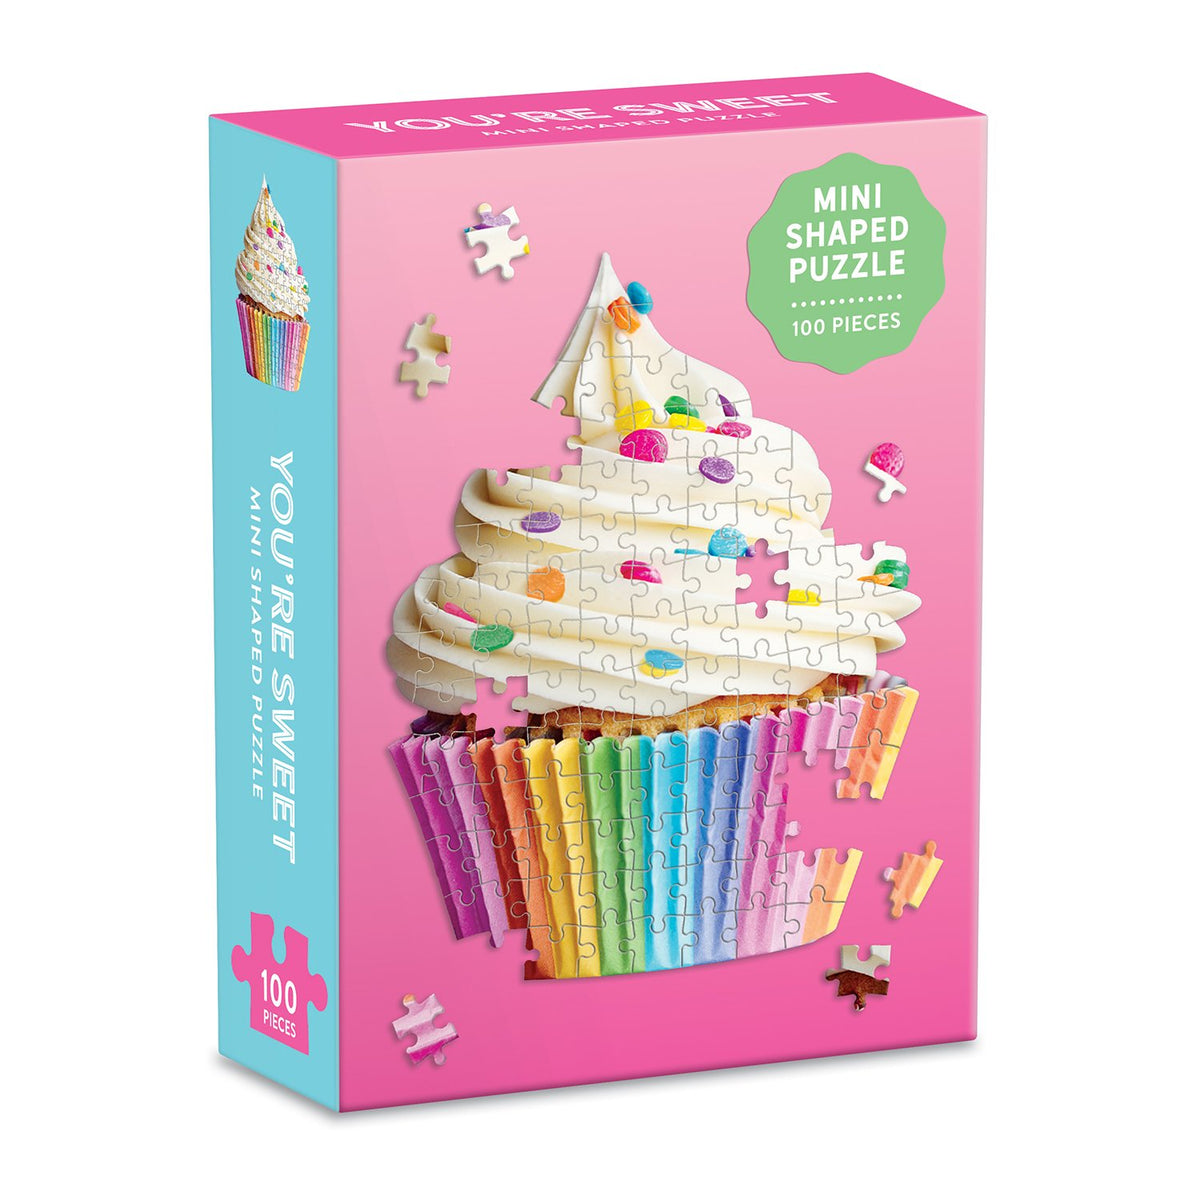 You're Sweet Cupcake 100 Piece Mini Shaped Puzzle Mini-Shaped Puzzles Galison 